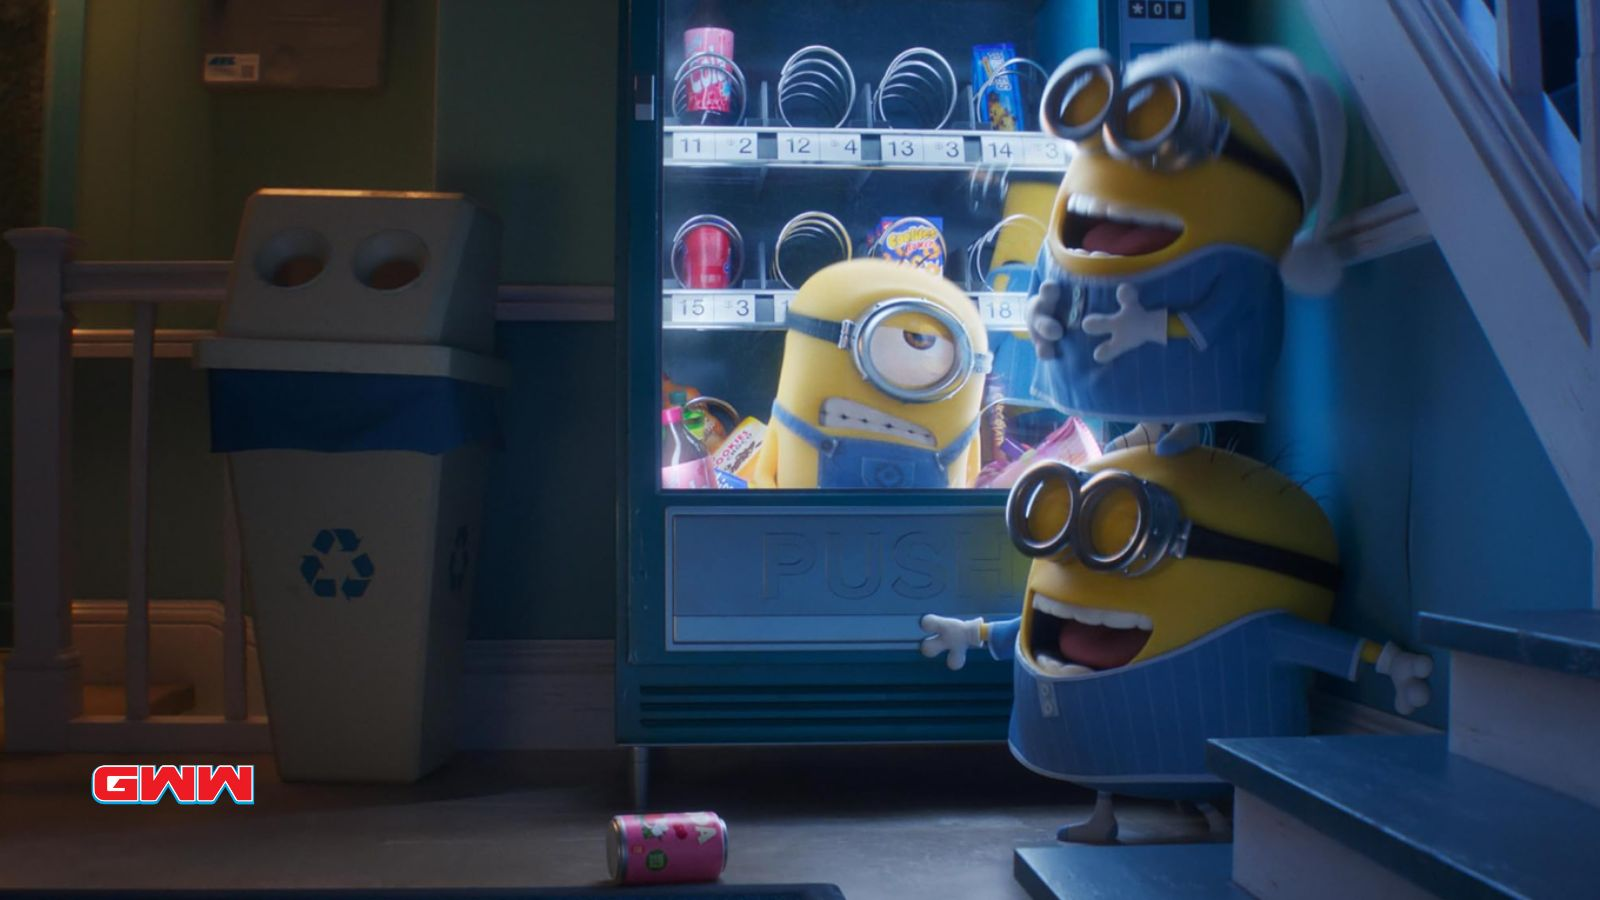 Minions laughing at the vending machine, Despicable Me 4 Release Date